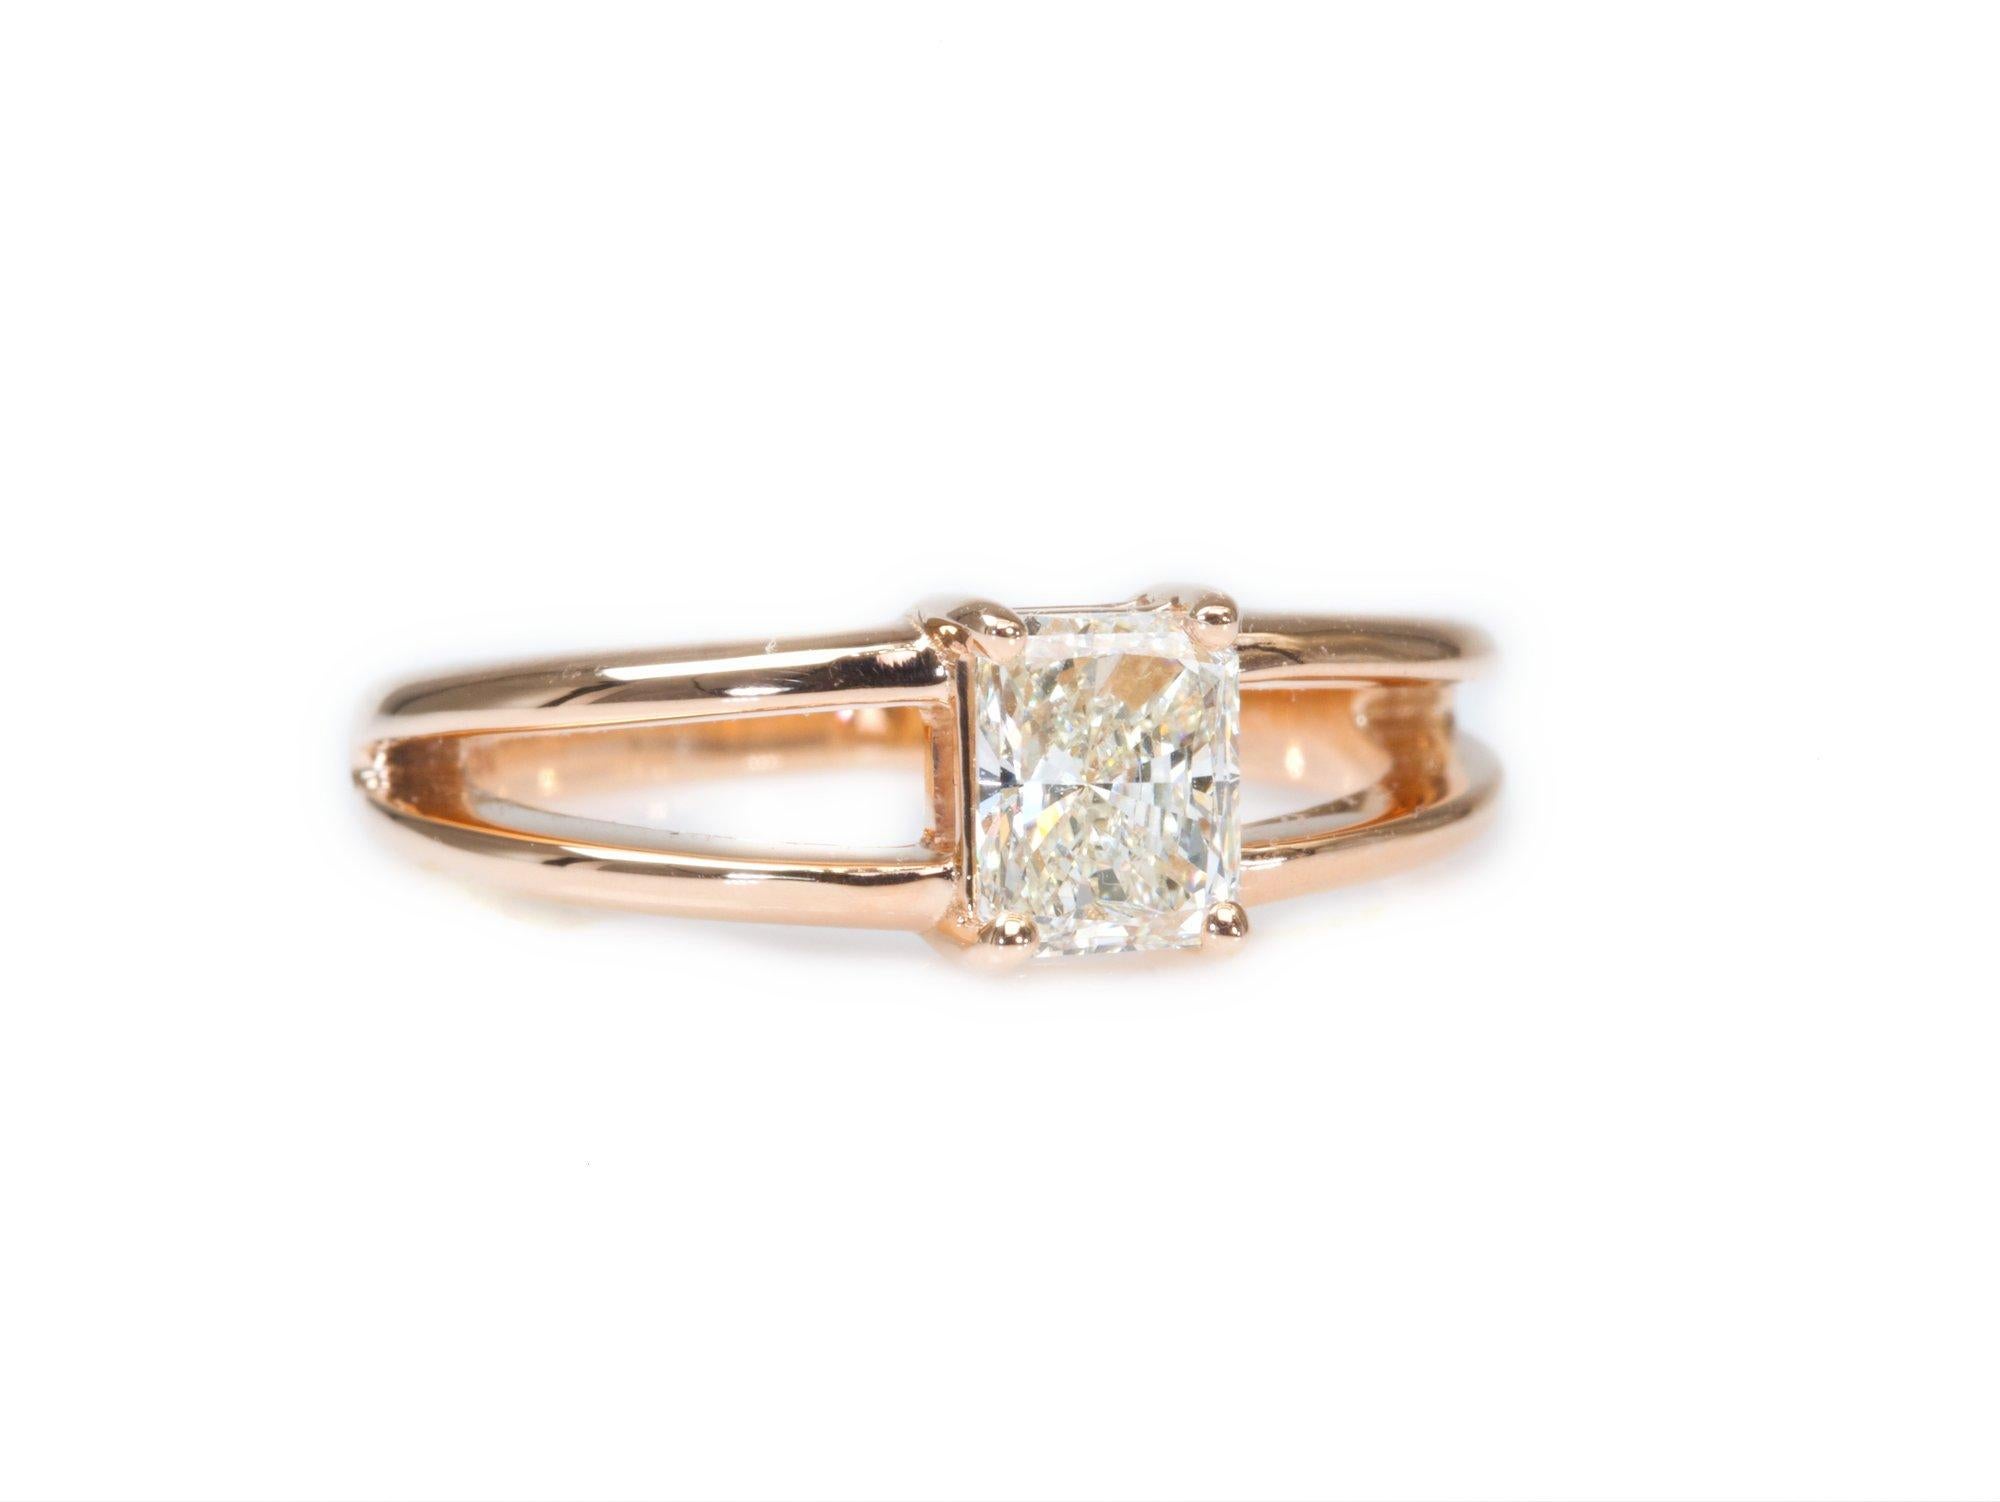 Stunning 18K Rose Gold Ring with 0.50 carat Natural Diamond- GIA Certificate For Sale 2